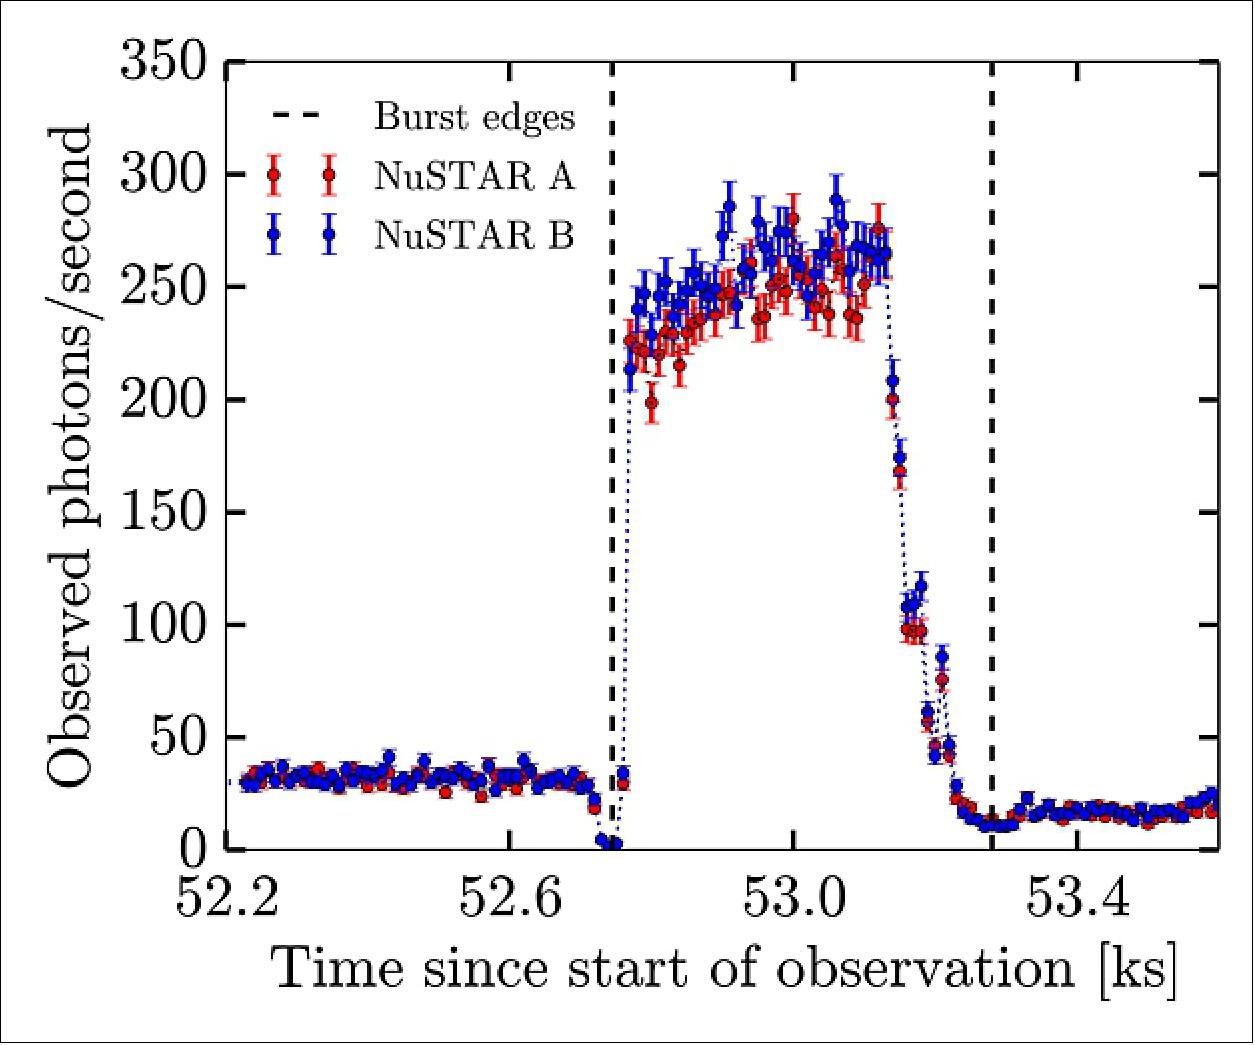 Figure 100: Variations of brightness observed in the binary system MXB 1730-335, also known as the 'Rapid Burster' as observed by NASA's NuSTAR X-ray telescope (image credit: NASA, adapted from Ref. 120) 121)